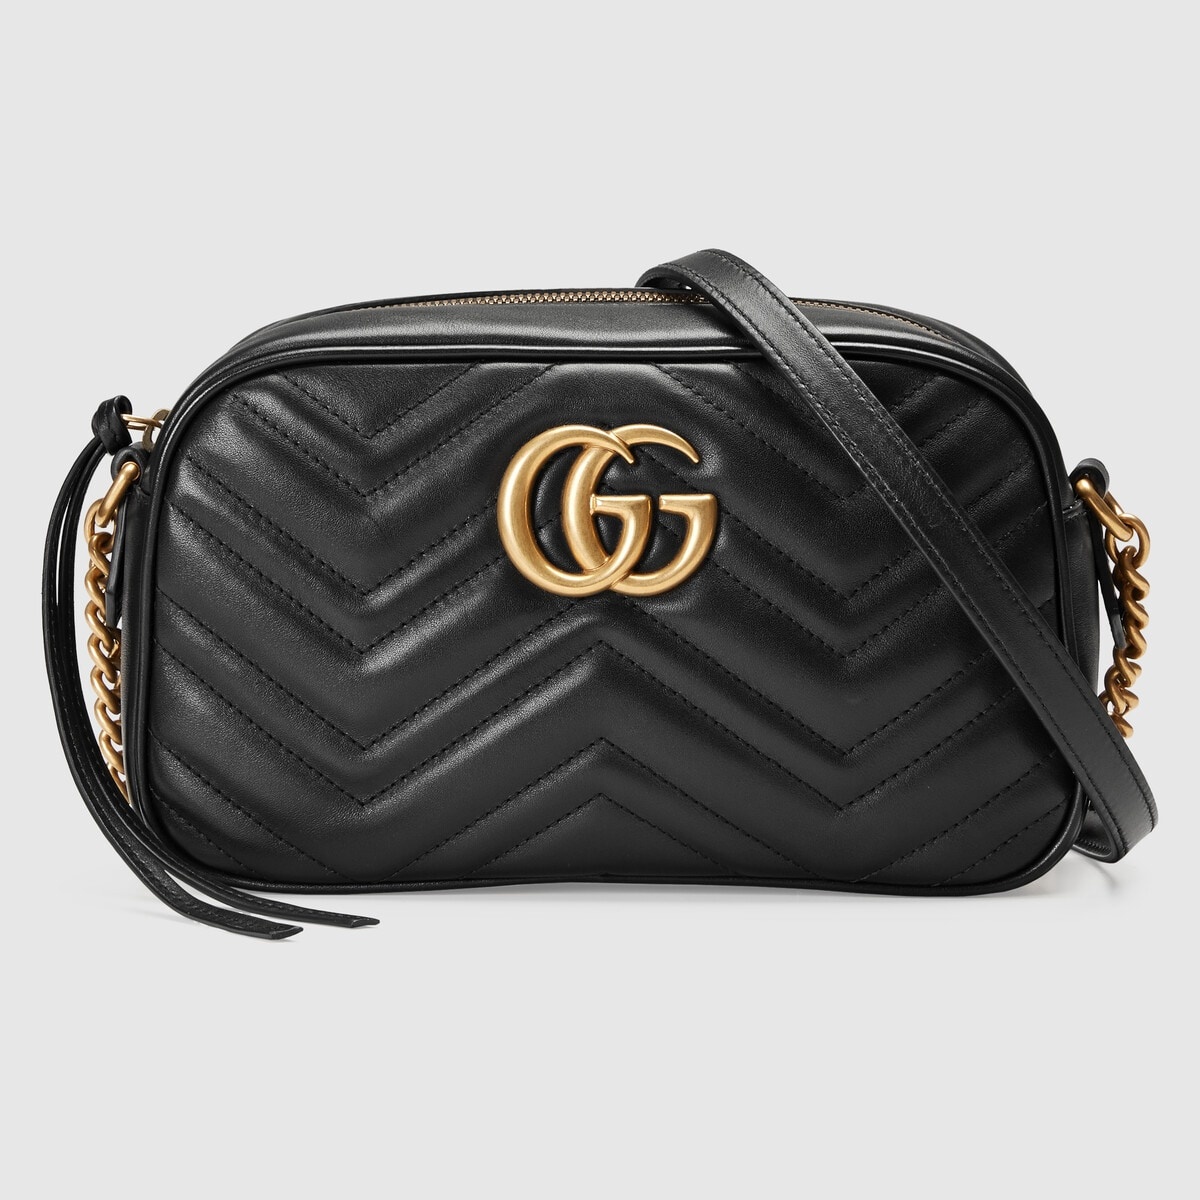 GG Marmont small shoulder bag - 1